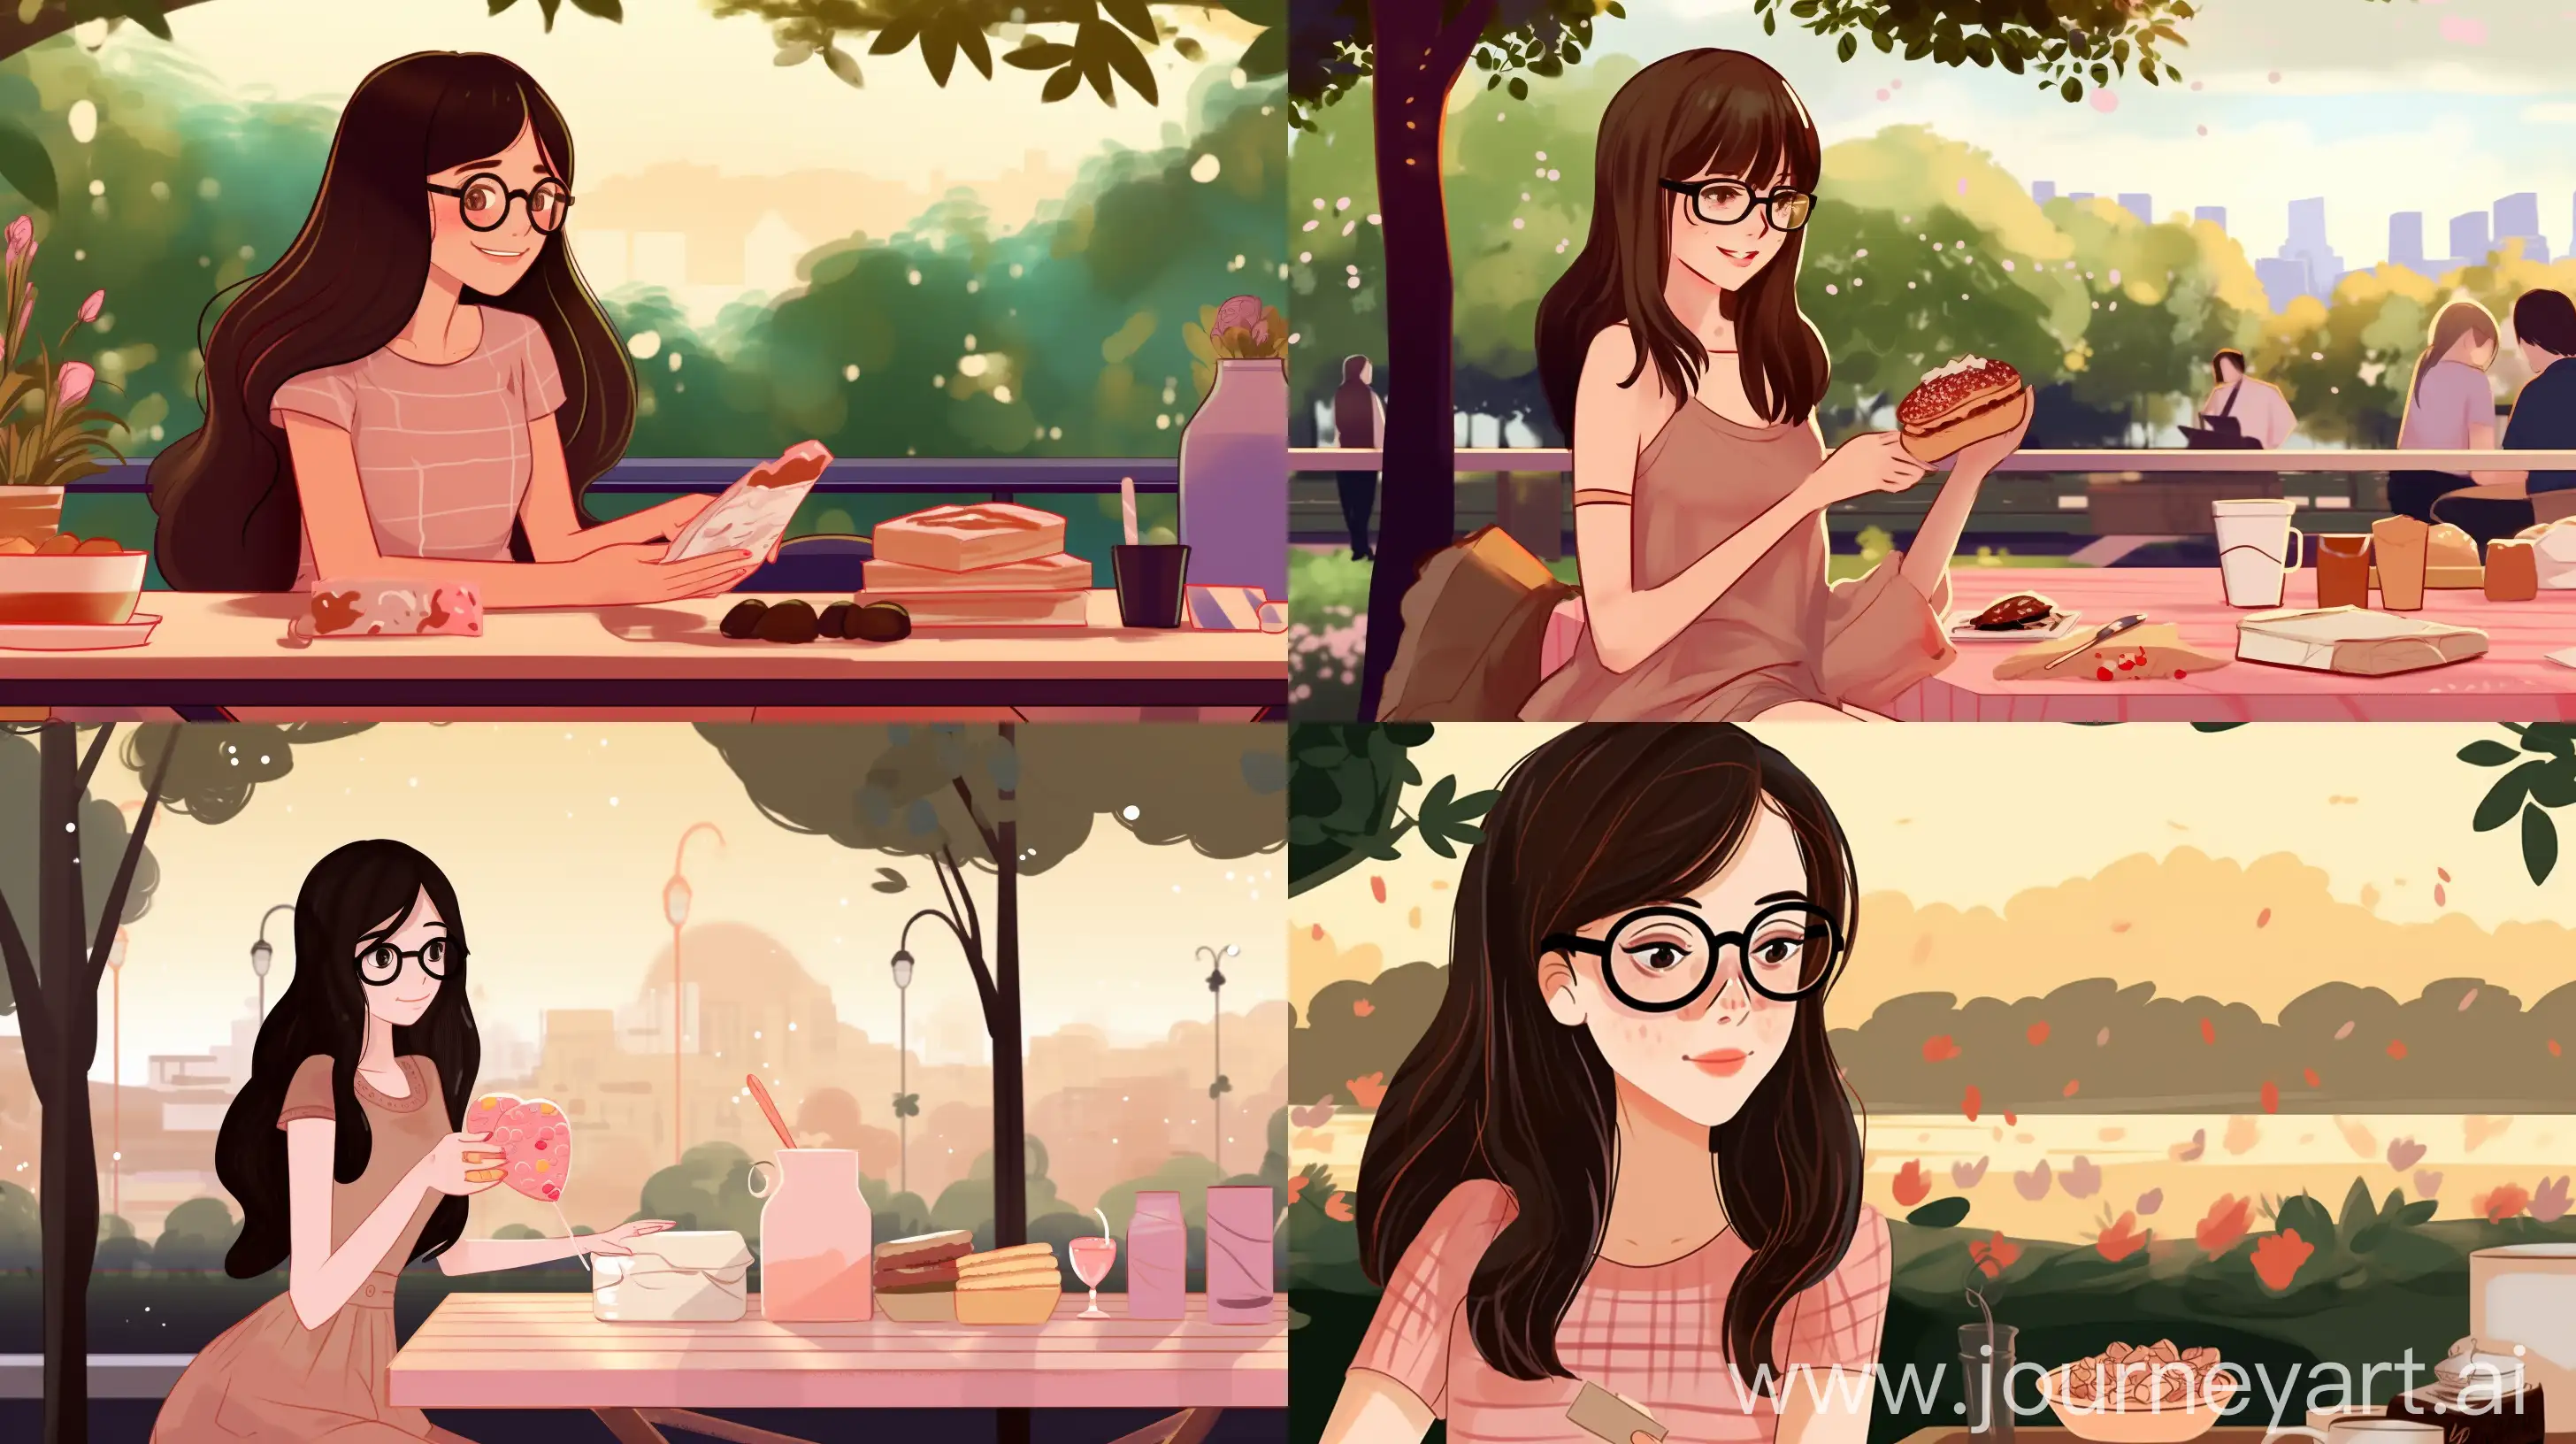 Craft an image featuring a delightful girl with mid-long hair highlighted in shades of honey on her naturally black hair, round spectacles, a slightly plump physique with cute puffy cheeks, and dressed in a delightful pink attire. Position her in a bustling city park surrounded by tall trees, people enjoying picnics, and the sun casting a gentle glow. Convey a lively and energetic atmosphere, capturing the essence of urban life and the girl's cheerful demeanor. Photography, DSLR with a 50mm lens, --ar 16:9 --v 5